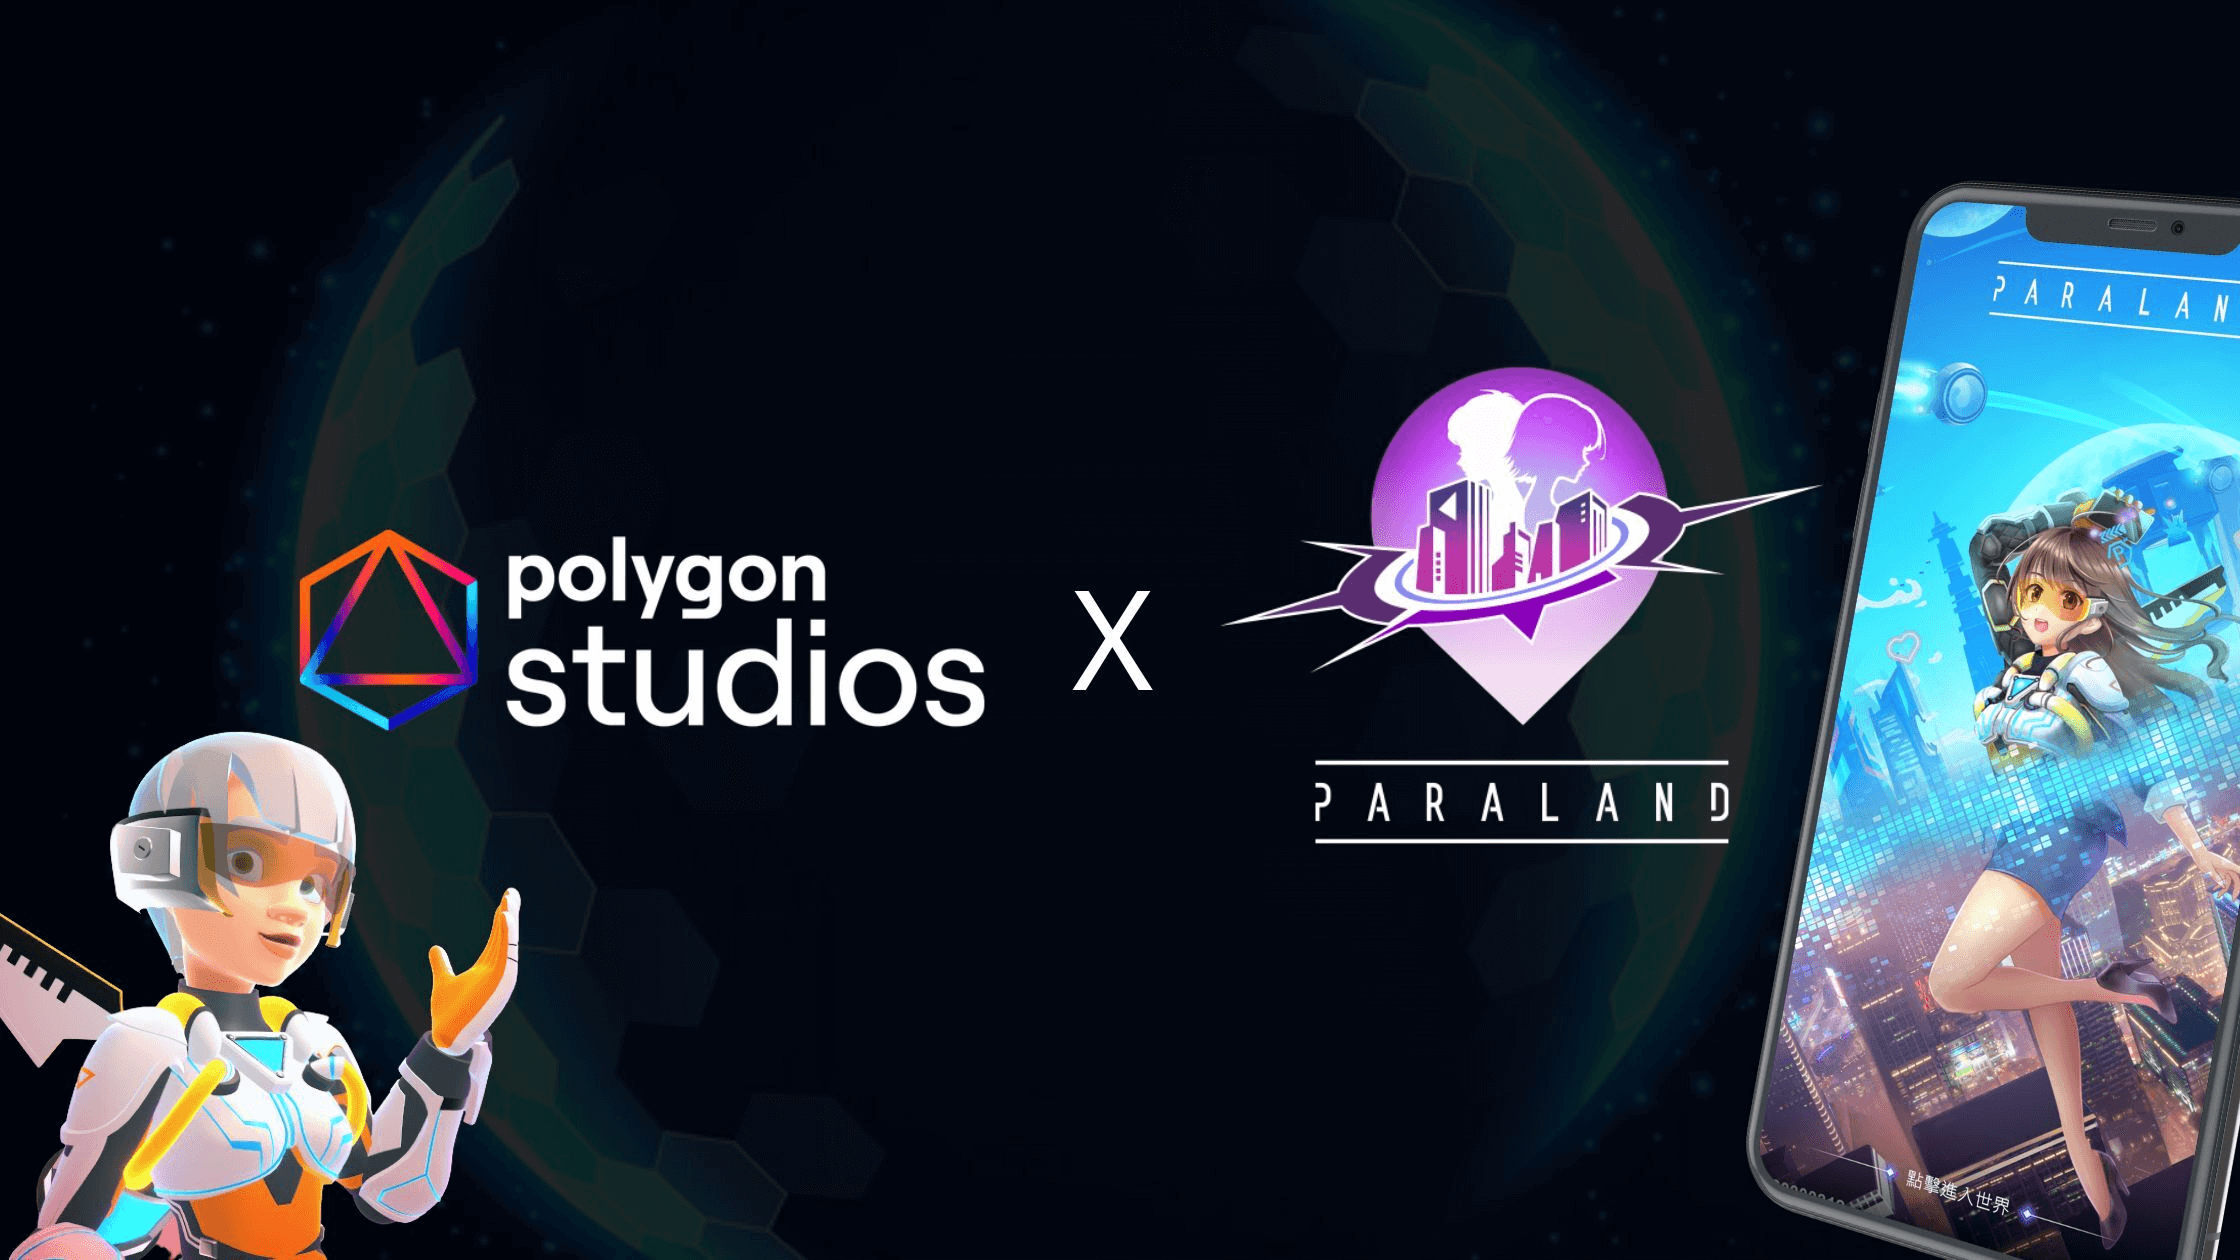 PARALAND has partnered up with Polygon Studios